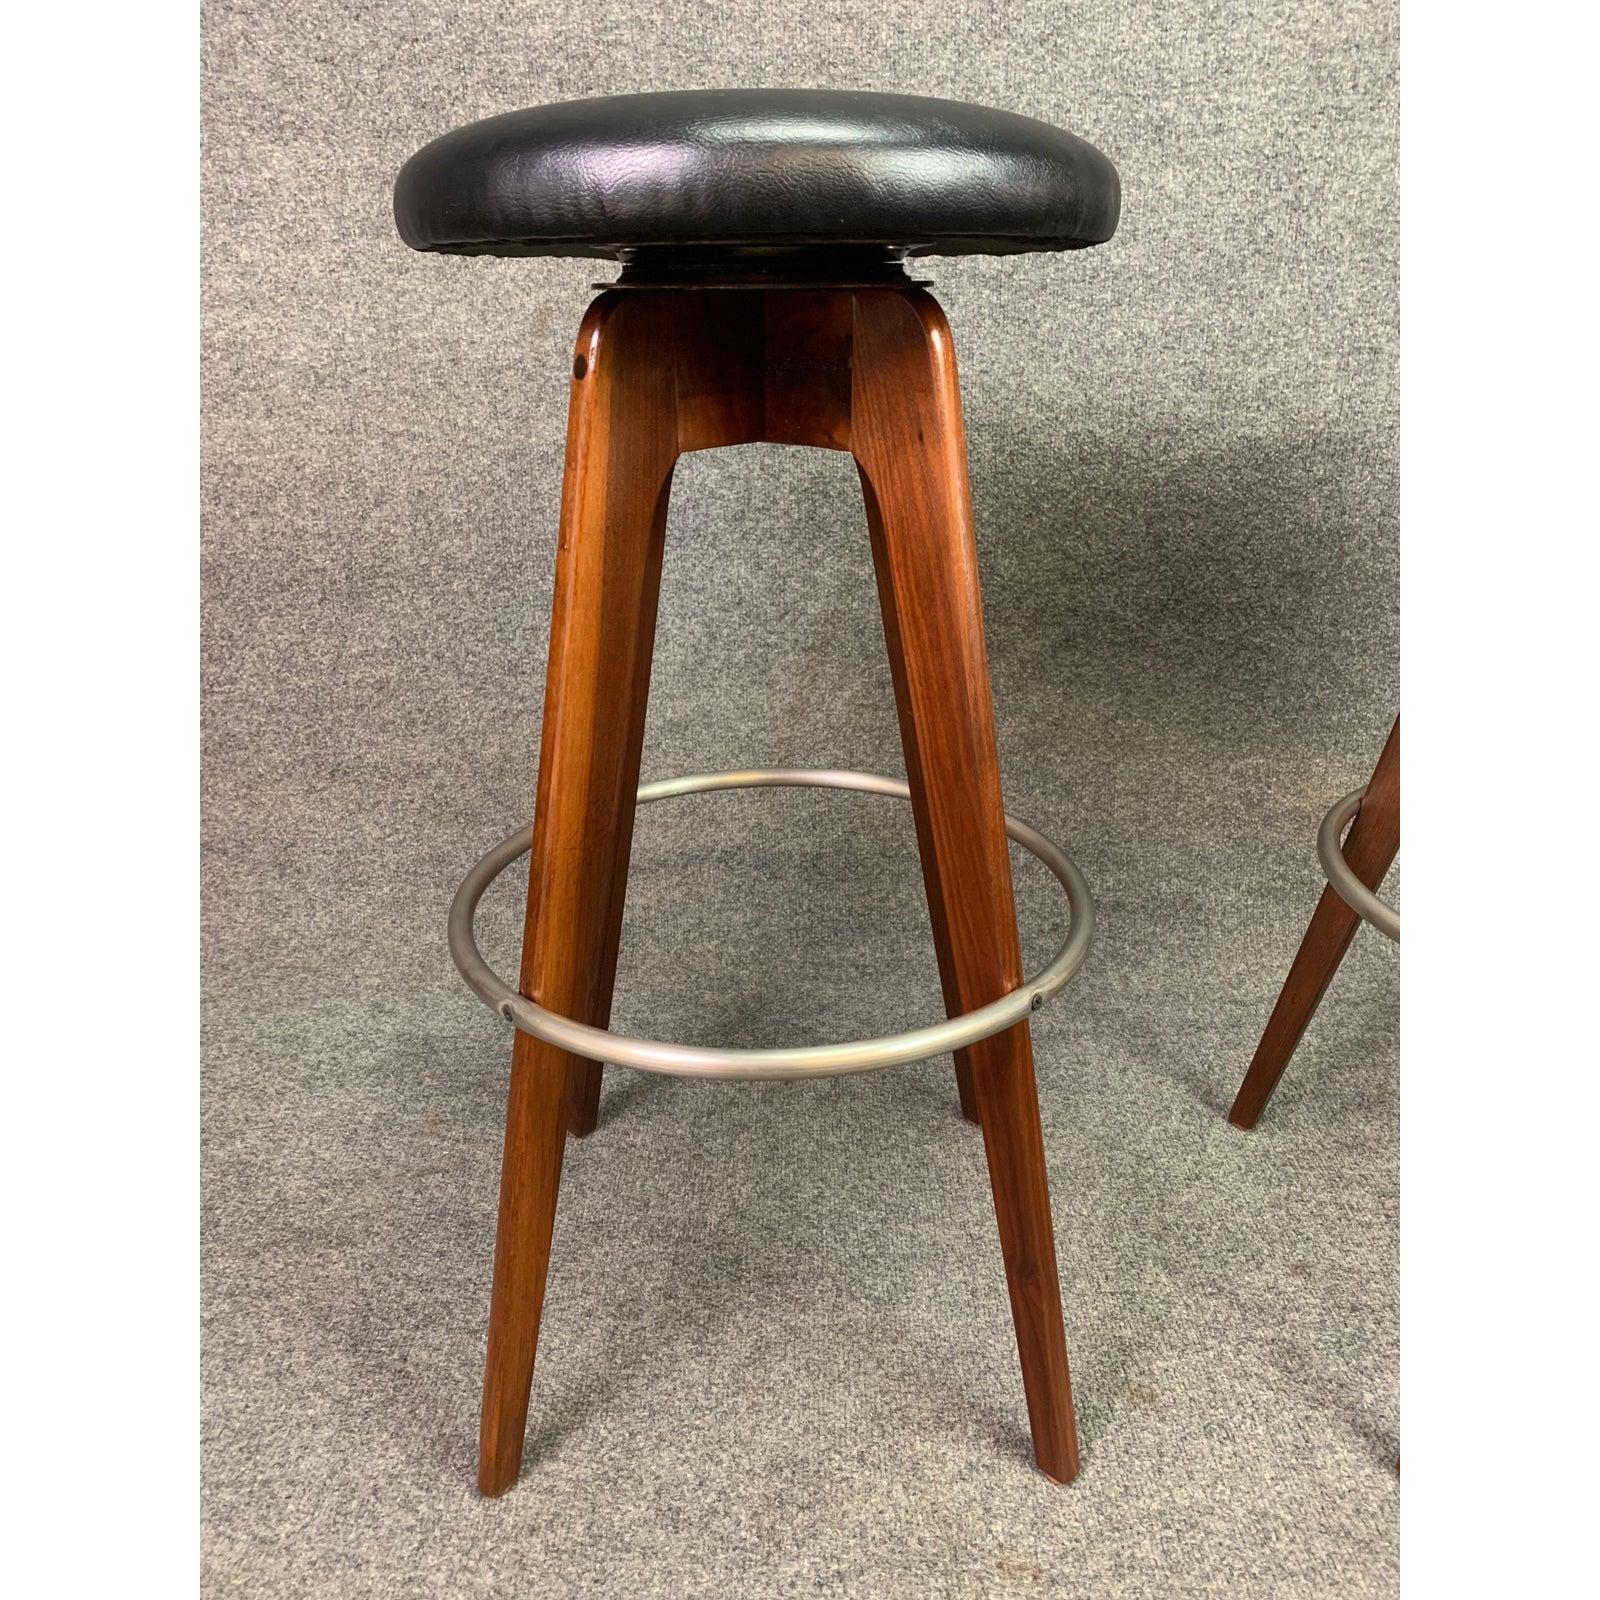 Here is a beautiful pair of Mid-Century Modern bar stools in walnut designed by Chet Beardsley and produced by Living Design in the US in the 1960s.
These fully restored stools feature a solid American black walnut frame, a polished metal circled